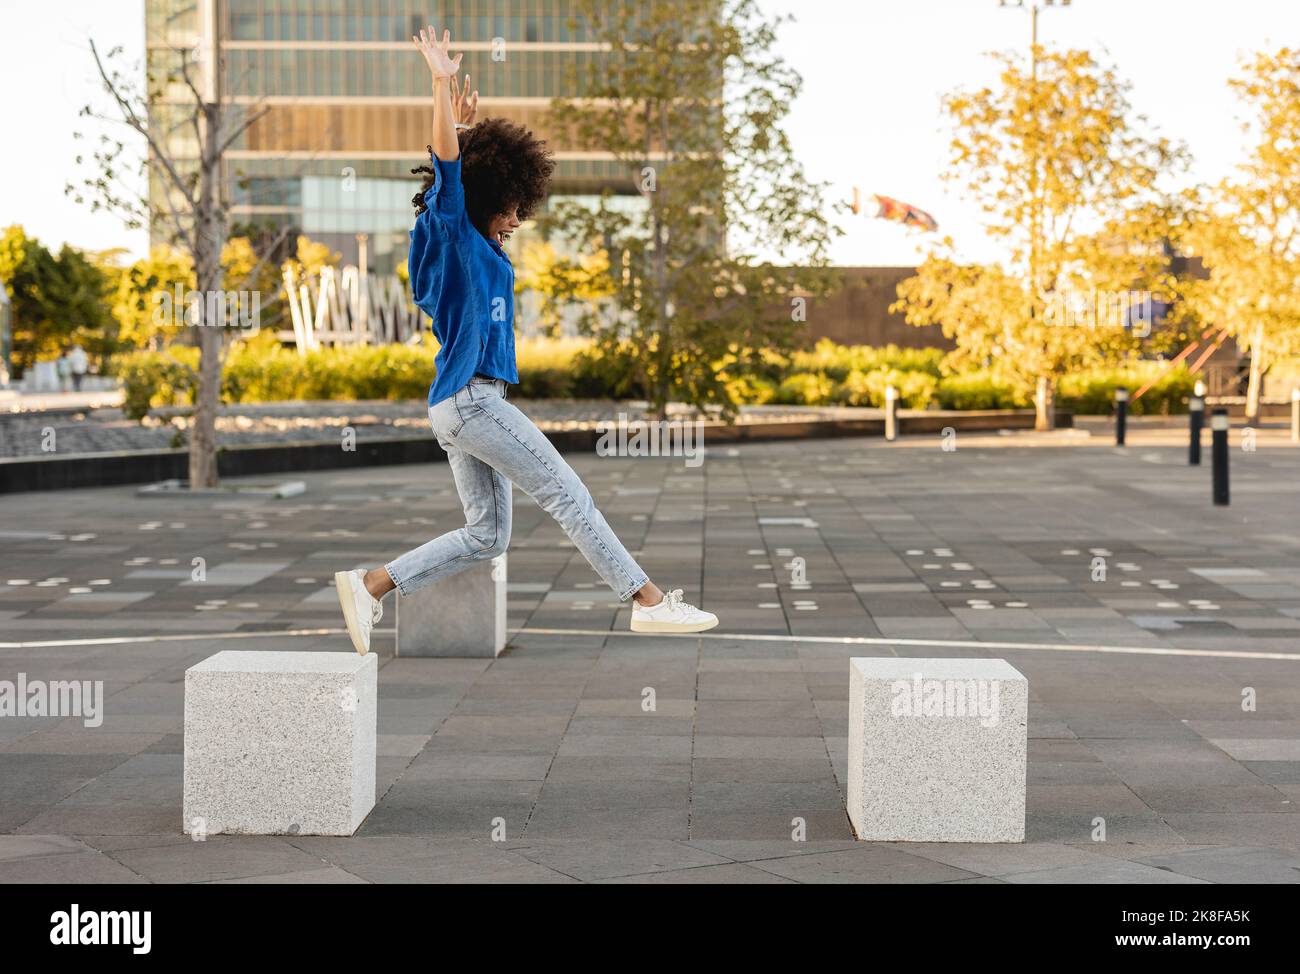 Woman with arms raised jumping on concrete block Stock Photo